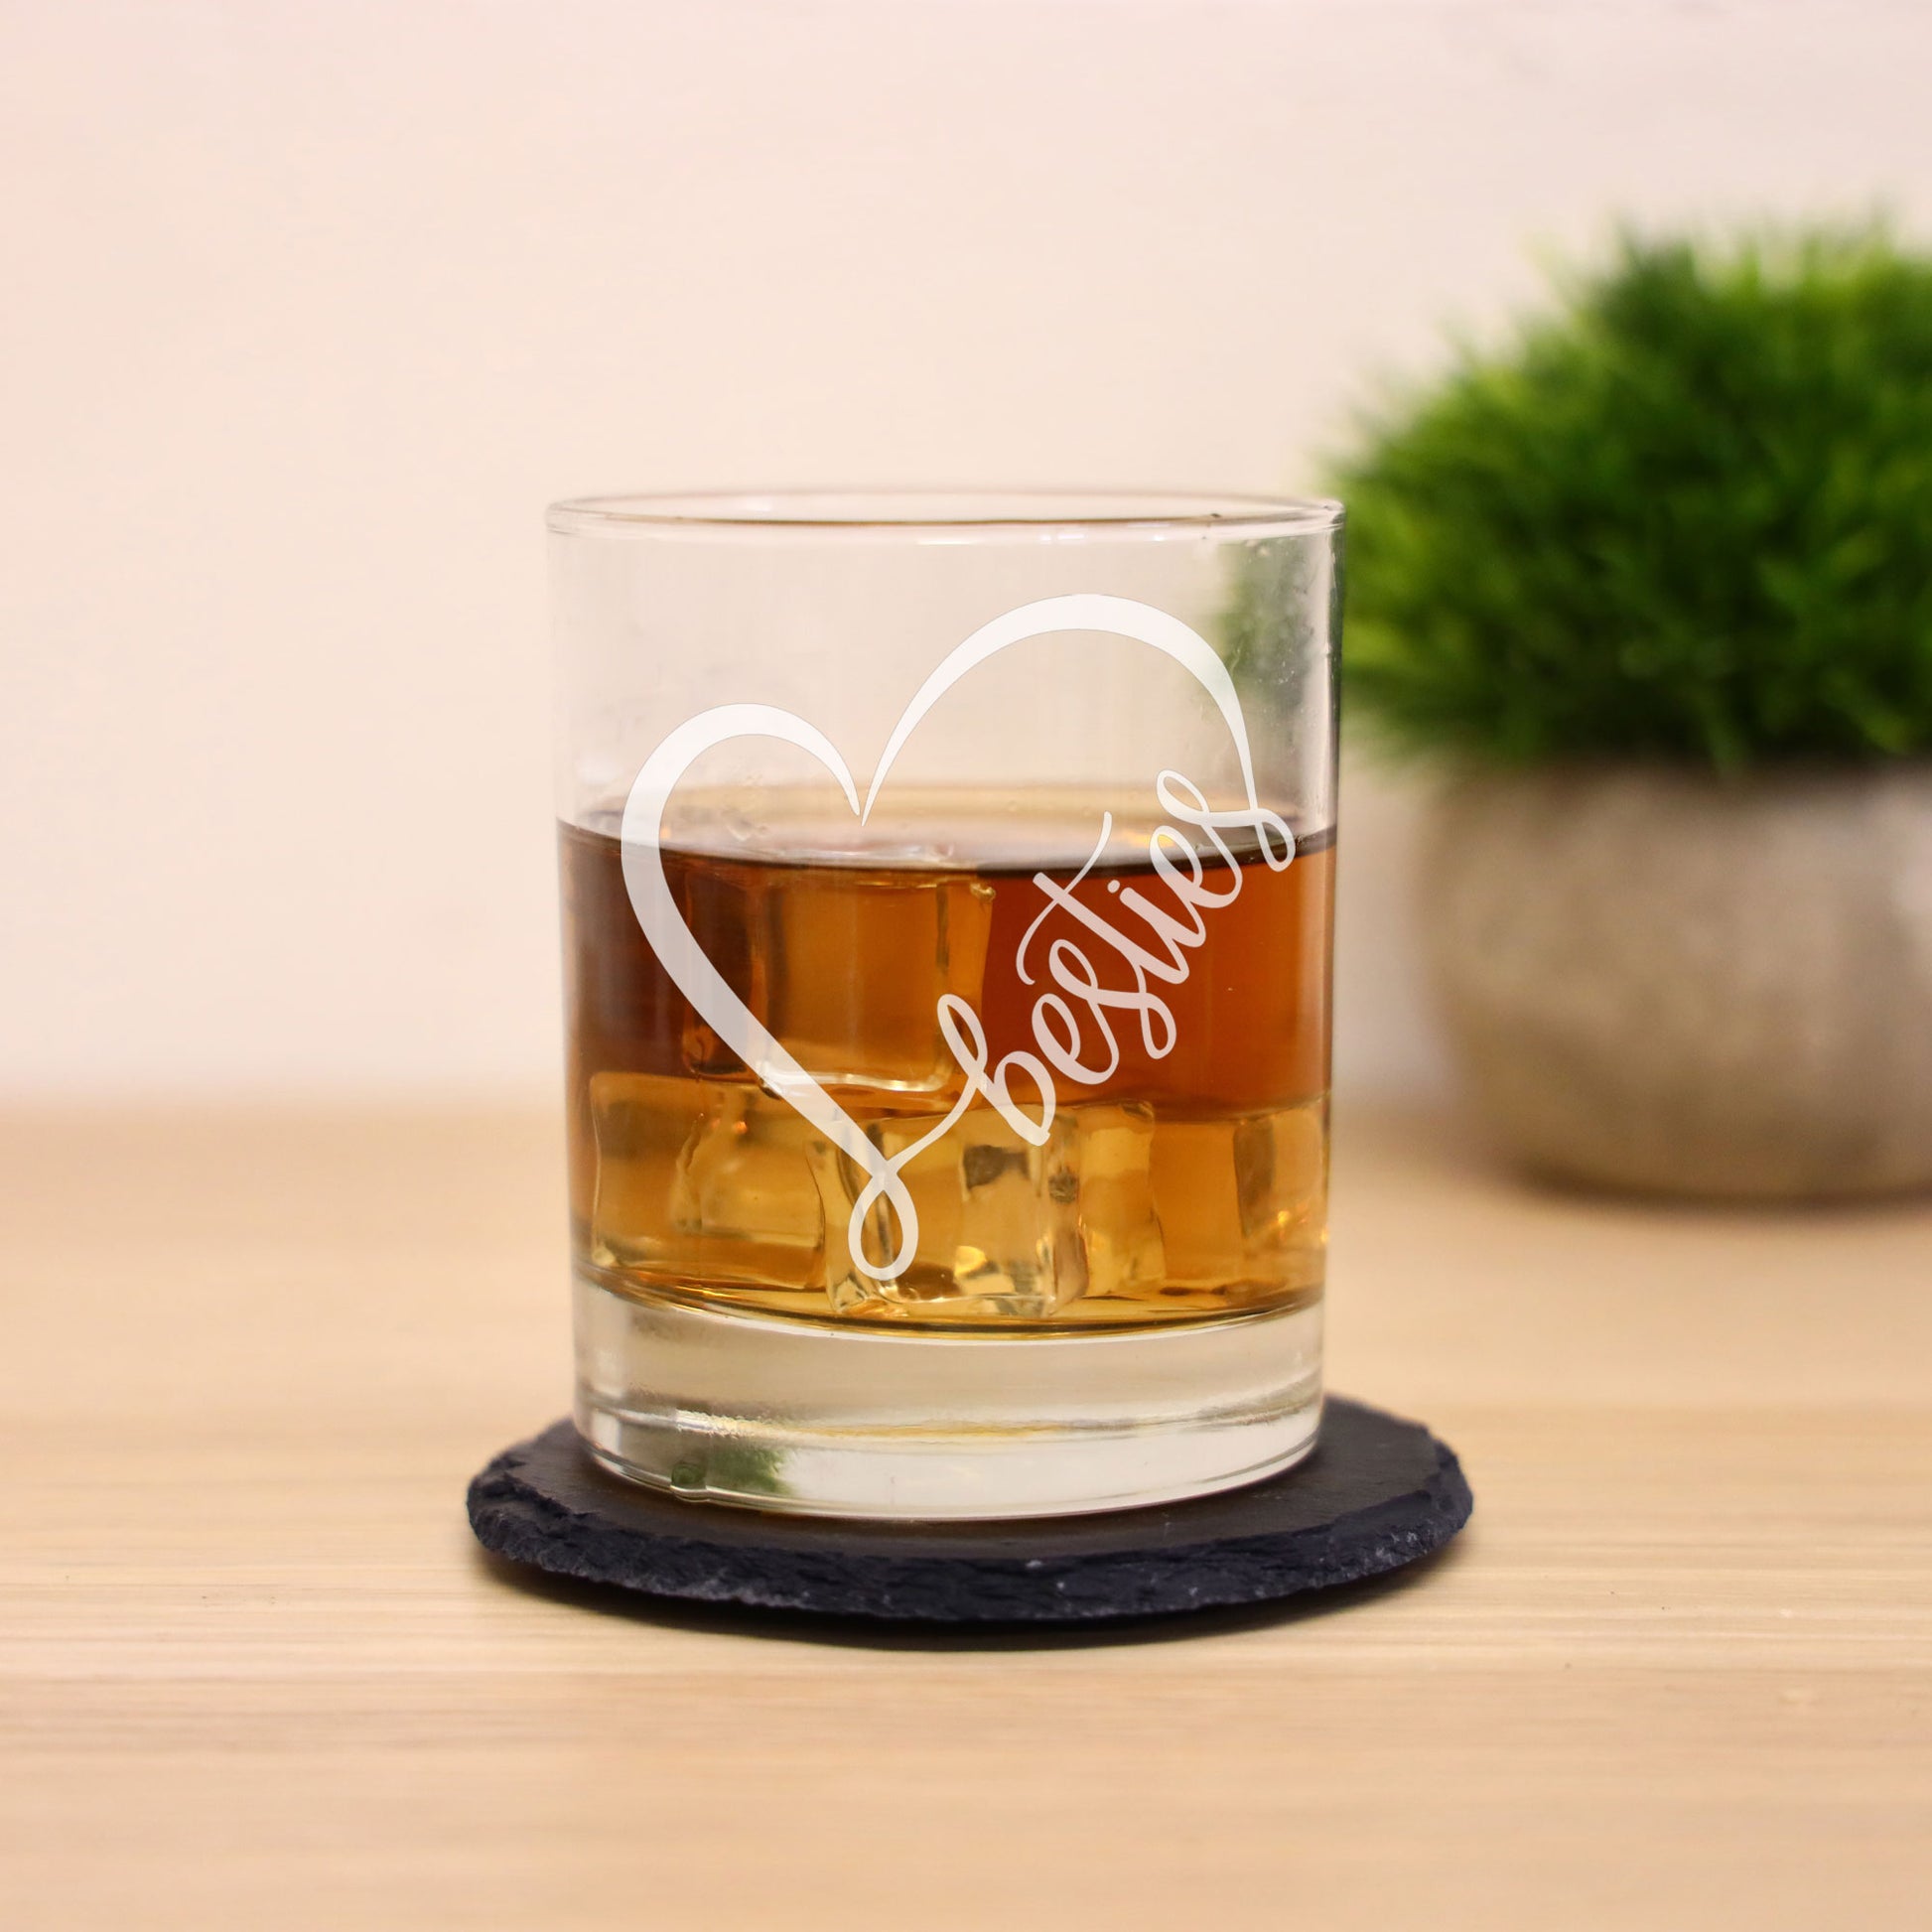 Besties Engraved Whisky Glass and/or Coaster Set  - Always Looking Good -   